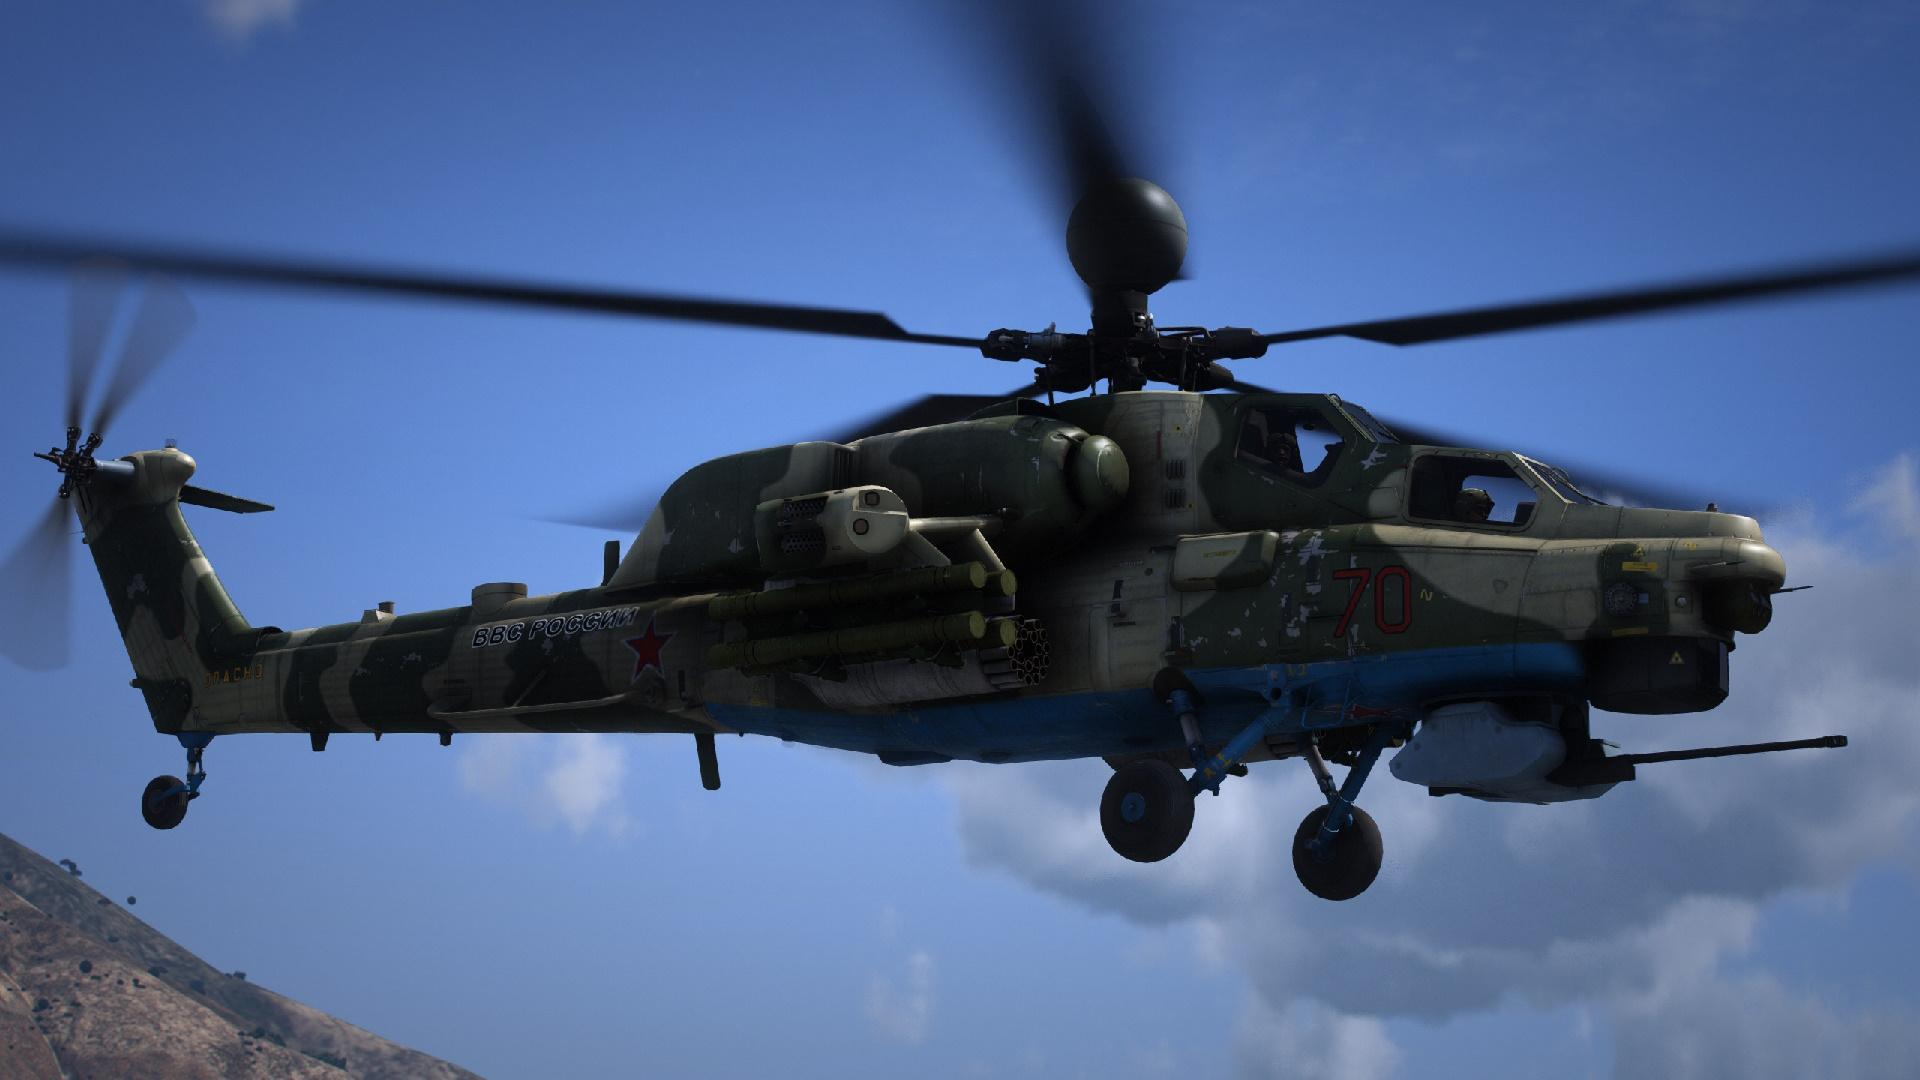 All the helicopters in gta 5 фото 83